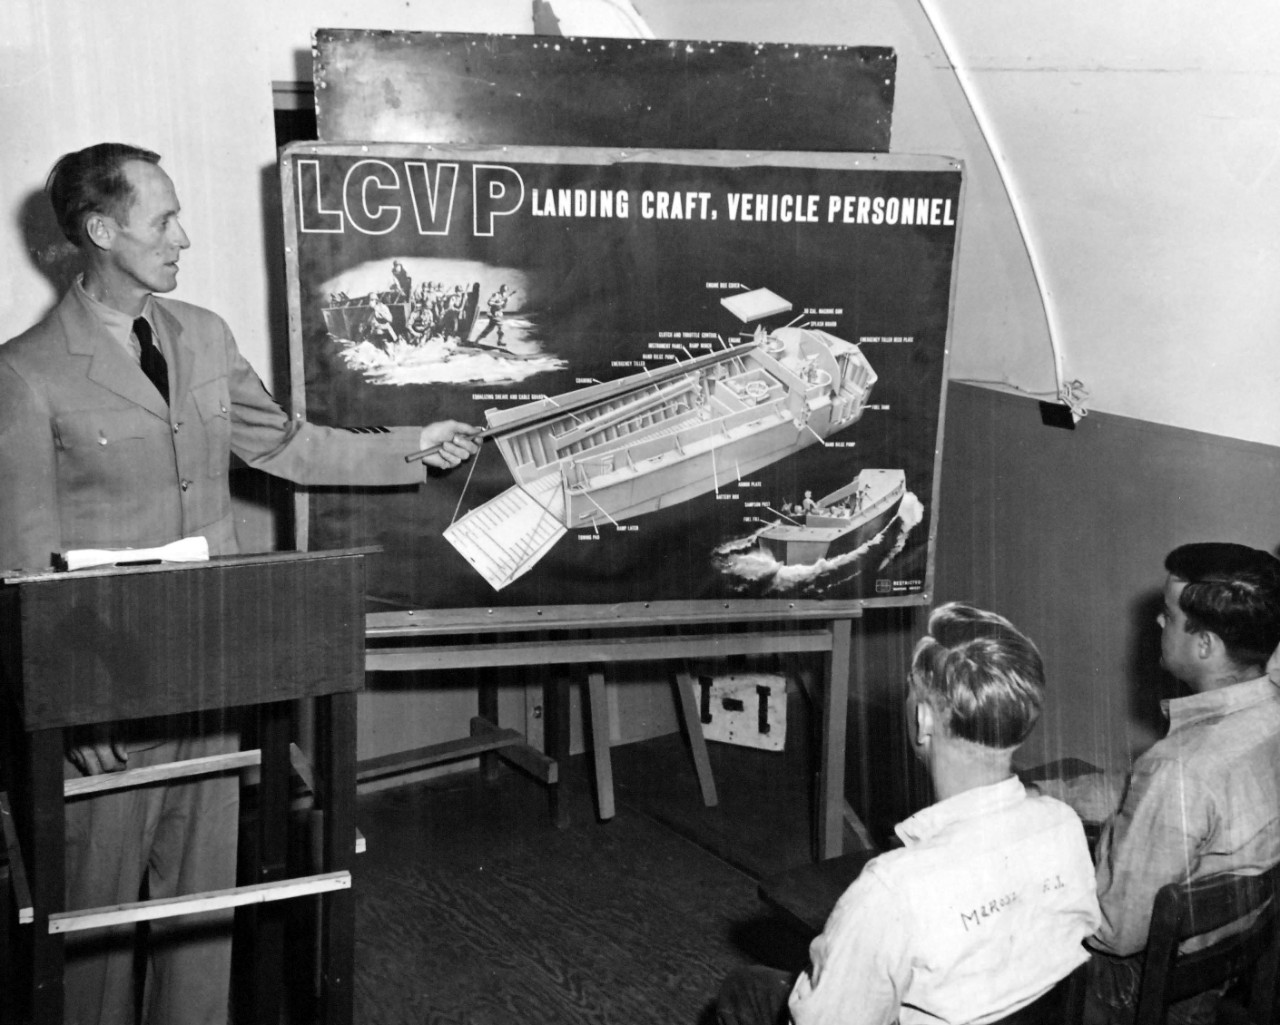 80-G-634812:   Landing Craft Control School, Naval Amphibious Base, Coronado, California, February 1, 1954.  Students receive training from BMC Paul A. Warden, USN, who explains to SN Frank J. Marosz and SN James E. pace the different features of the LCVP in a class on boat nomenclature.  Official U.S. Navy Photograph, now in the collections of the National Archives.  